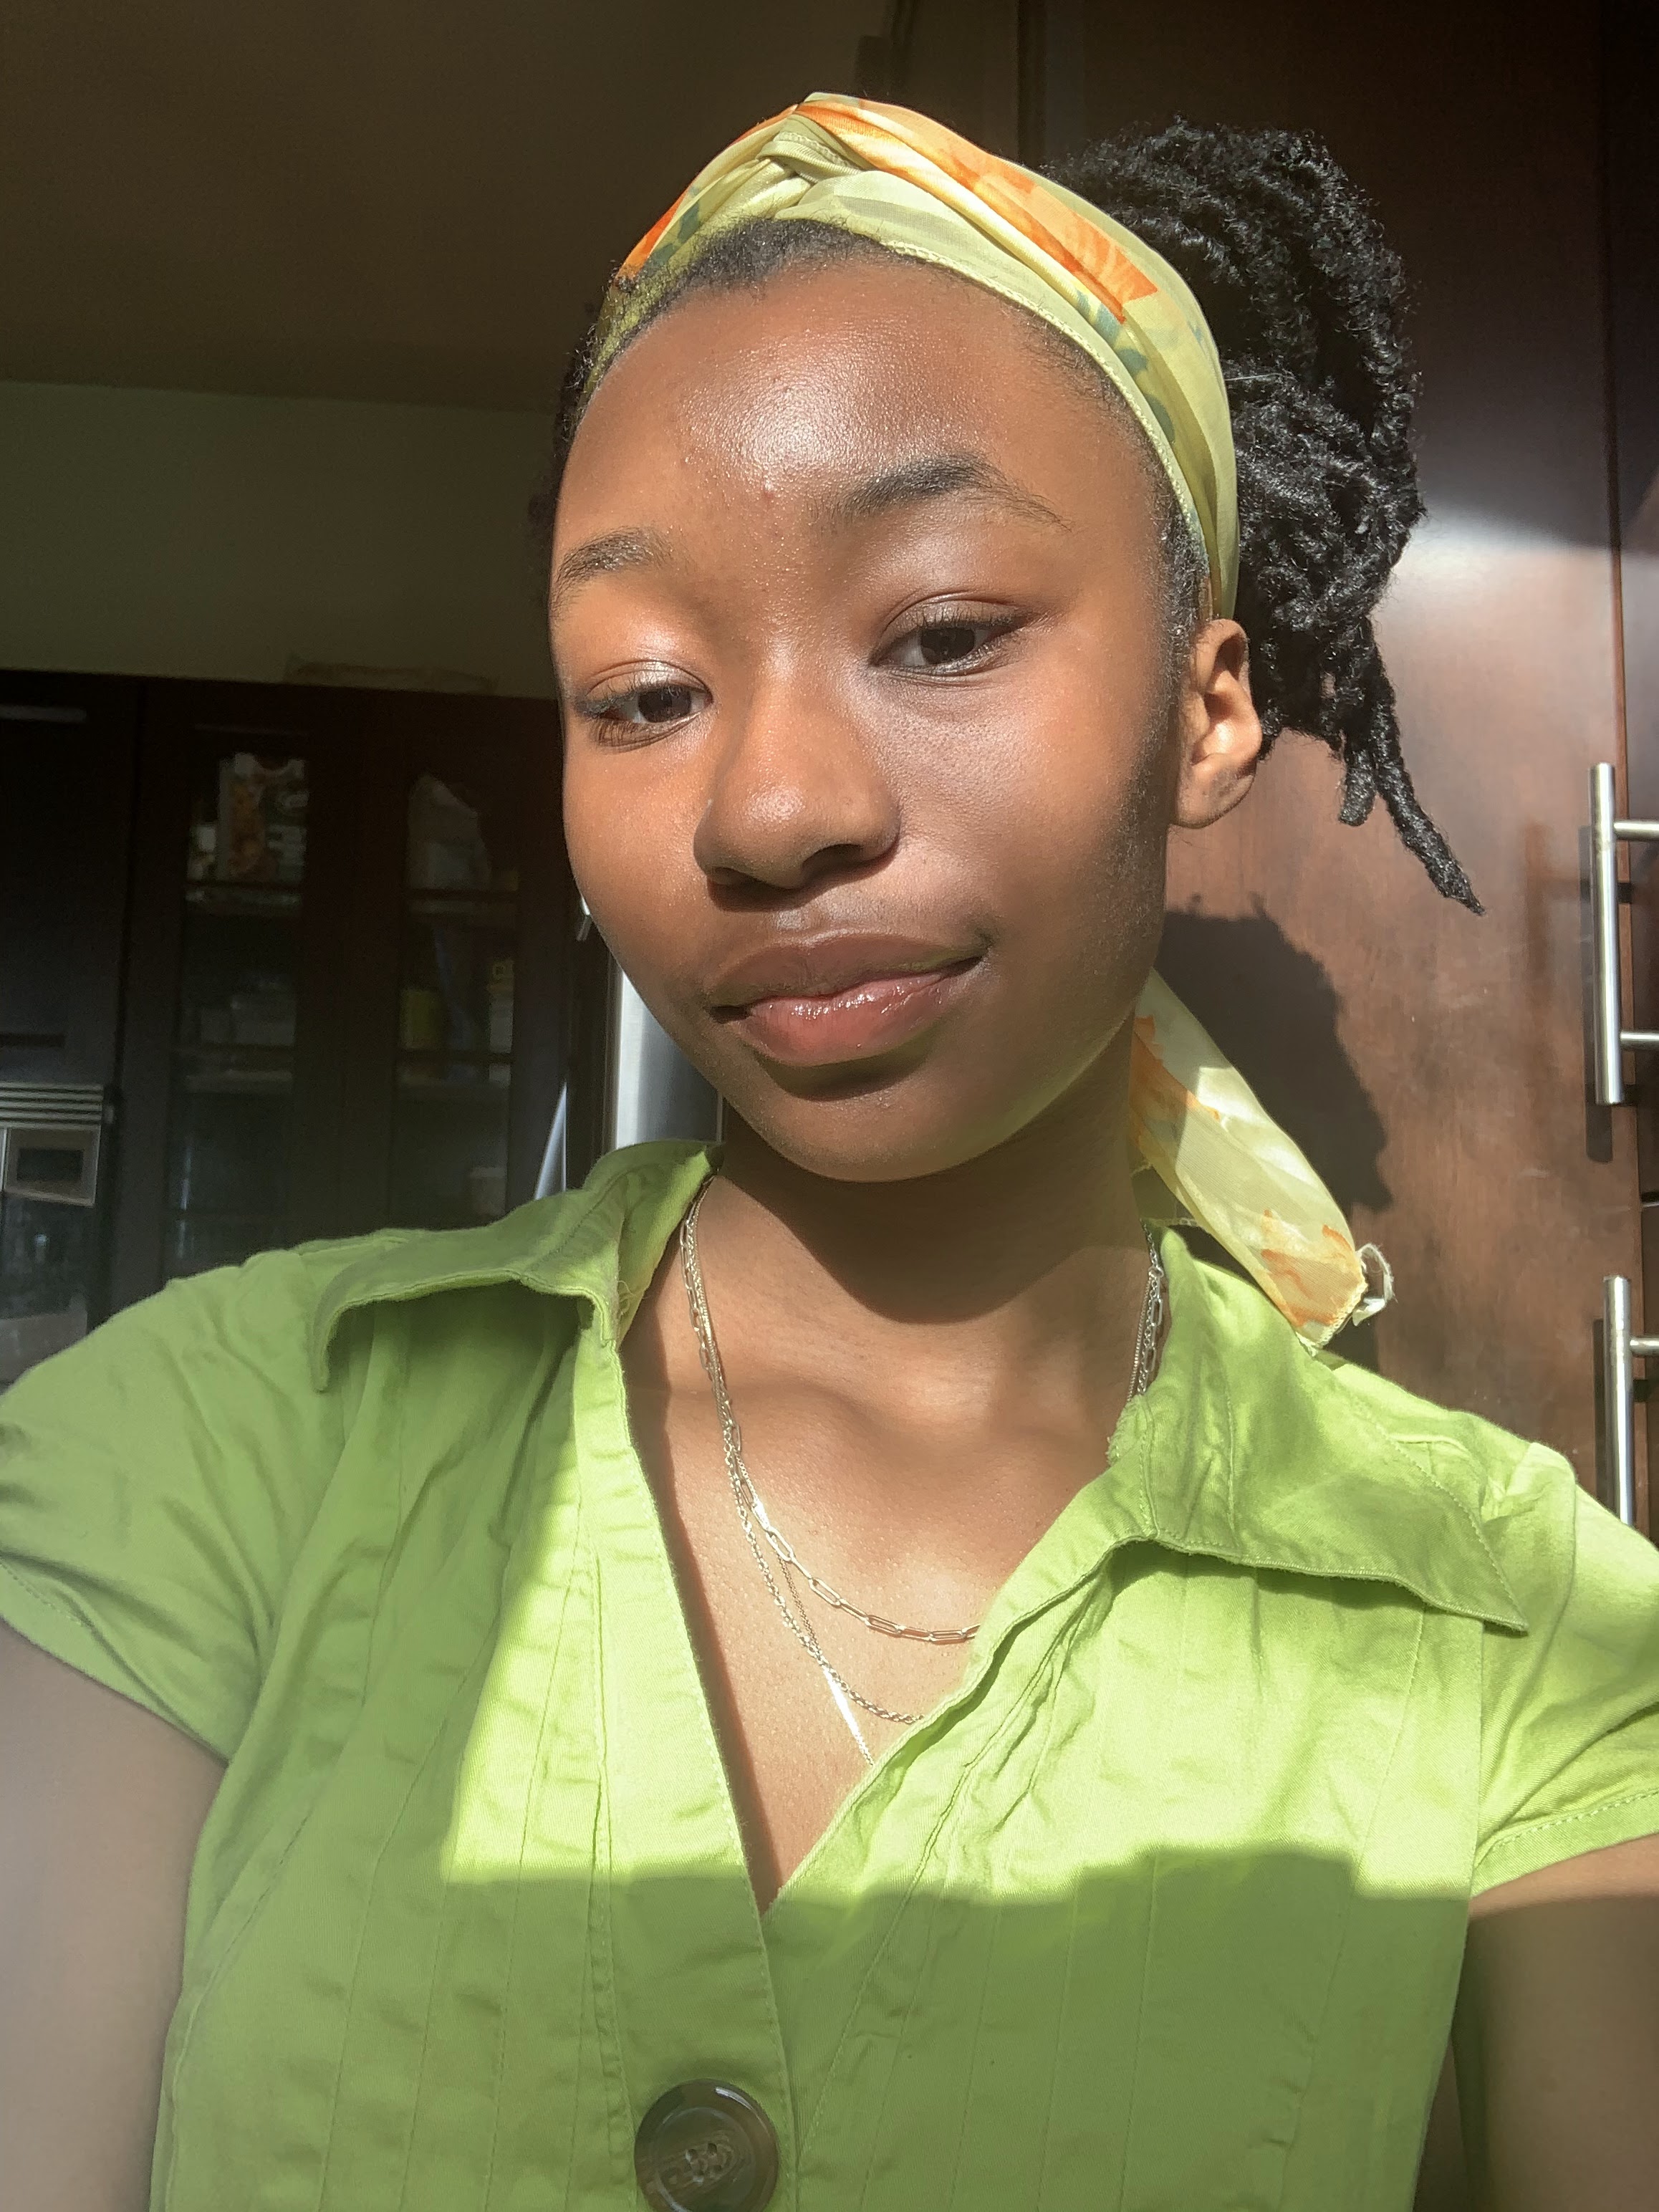 Tori smiles while wearing a bright green button down shirt and green headband with her hair pulled back.